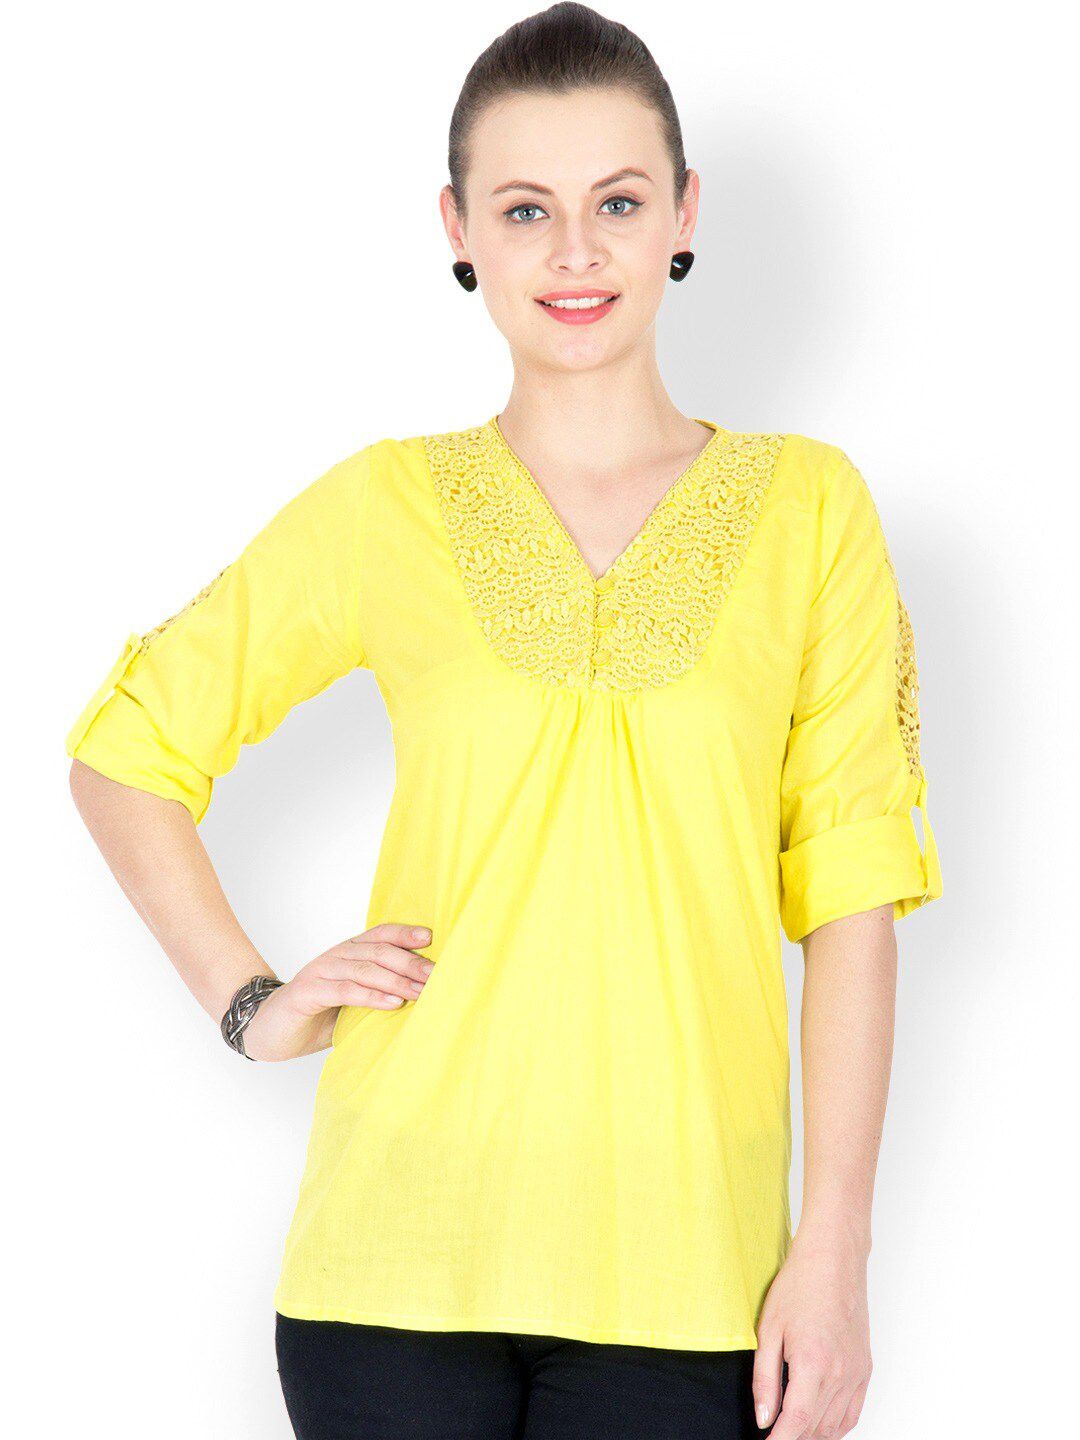 U&F Yellow Roll-Up Sleeves Top Price in India